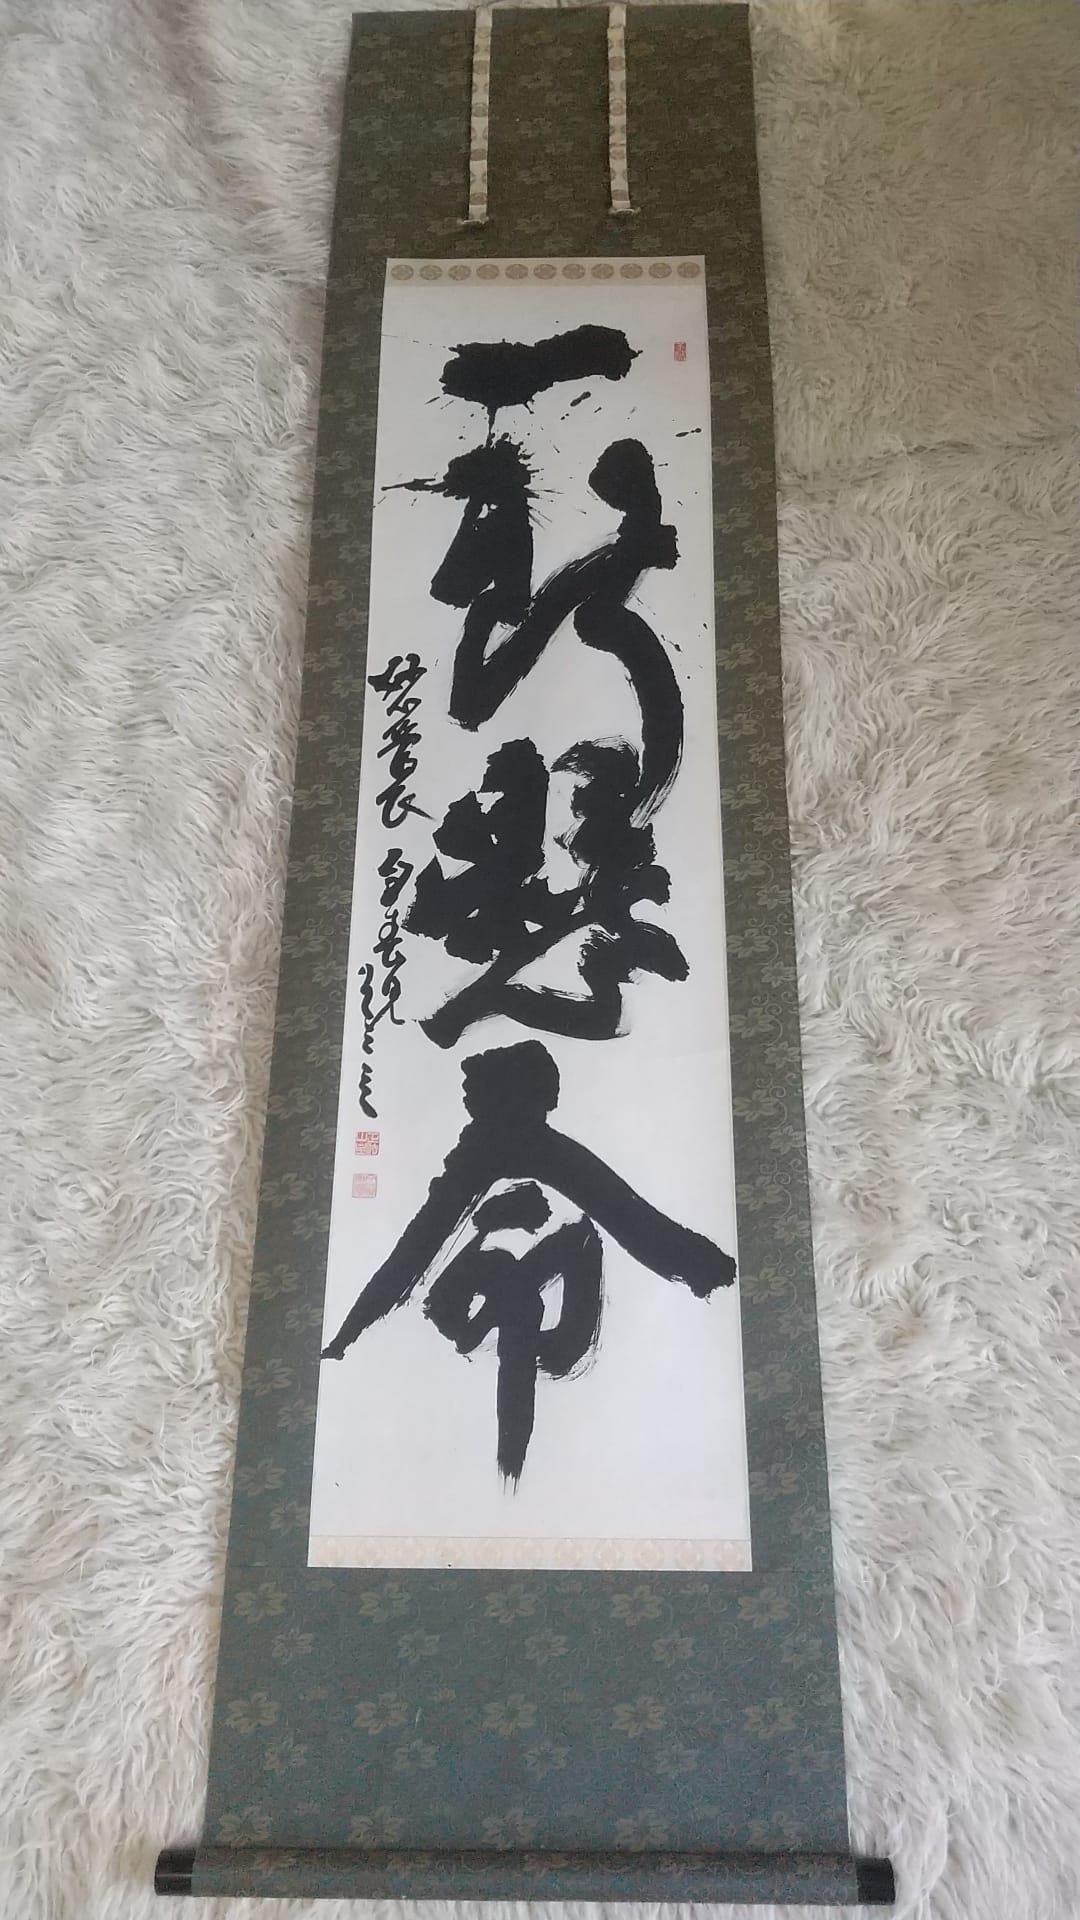 Antique Japanese Calligraphy scroll 2 meters, quality silk mounts, signed sealed